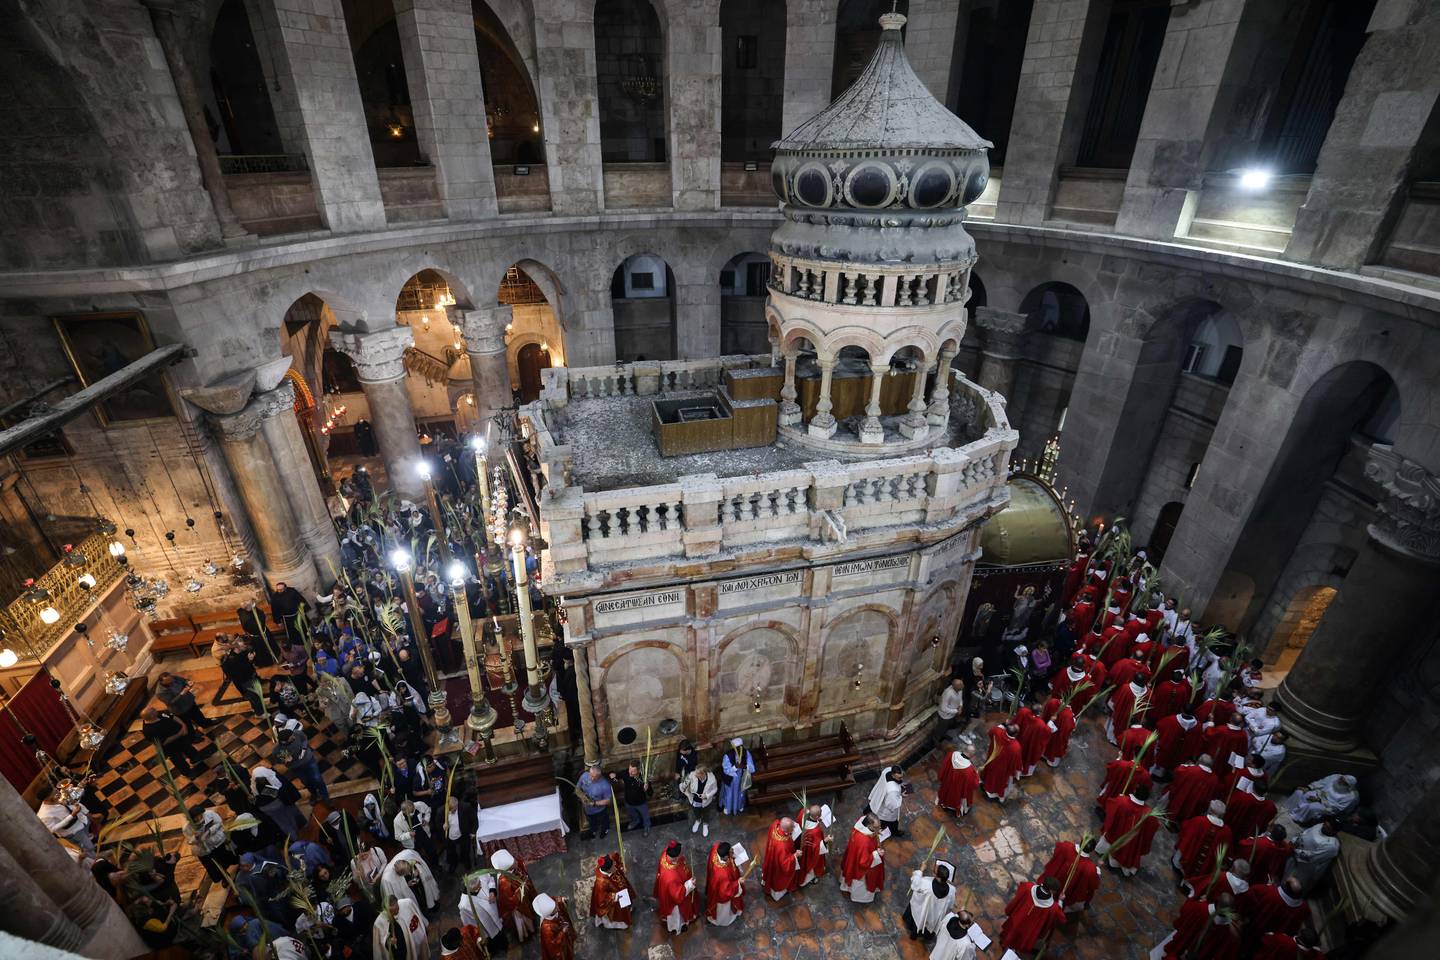 Roman Catholic clergy carry palm branches during a Palm Sunday procession at the Church of the Holy Sepulchre in Jerusalem's Old City. AFP